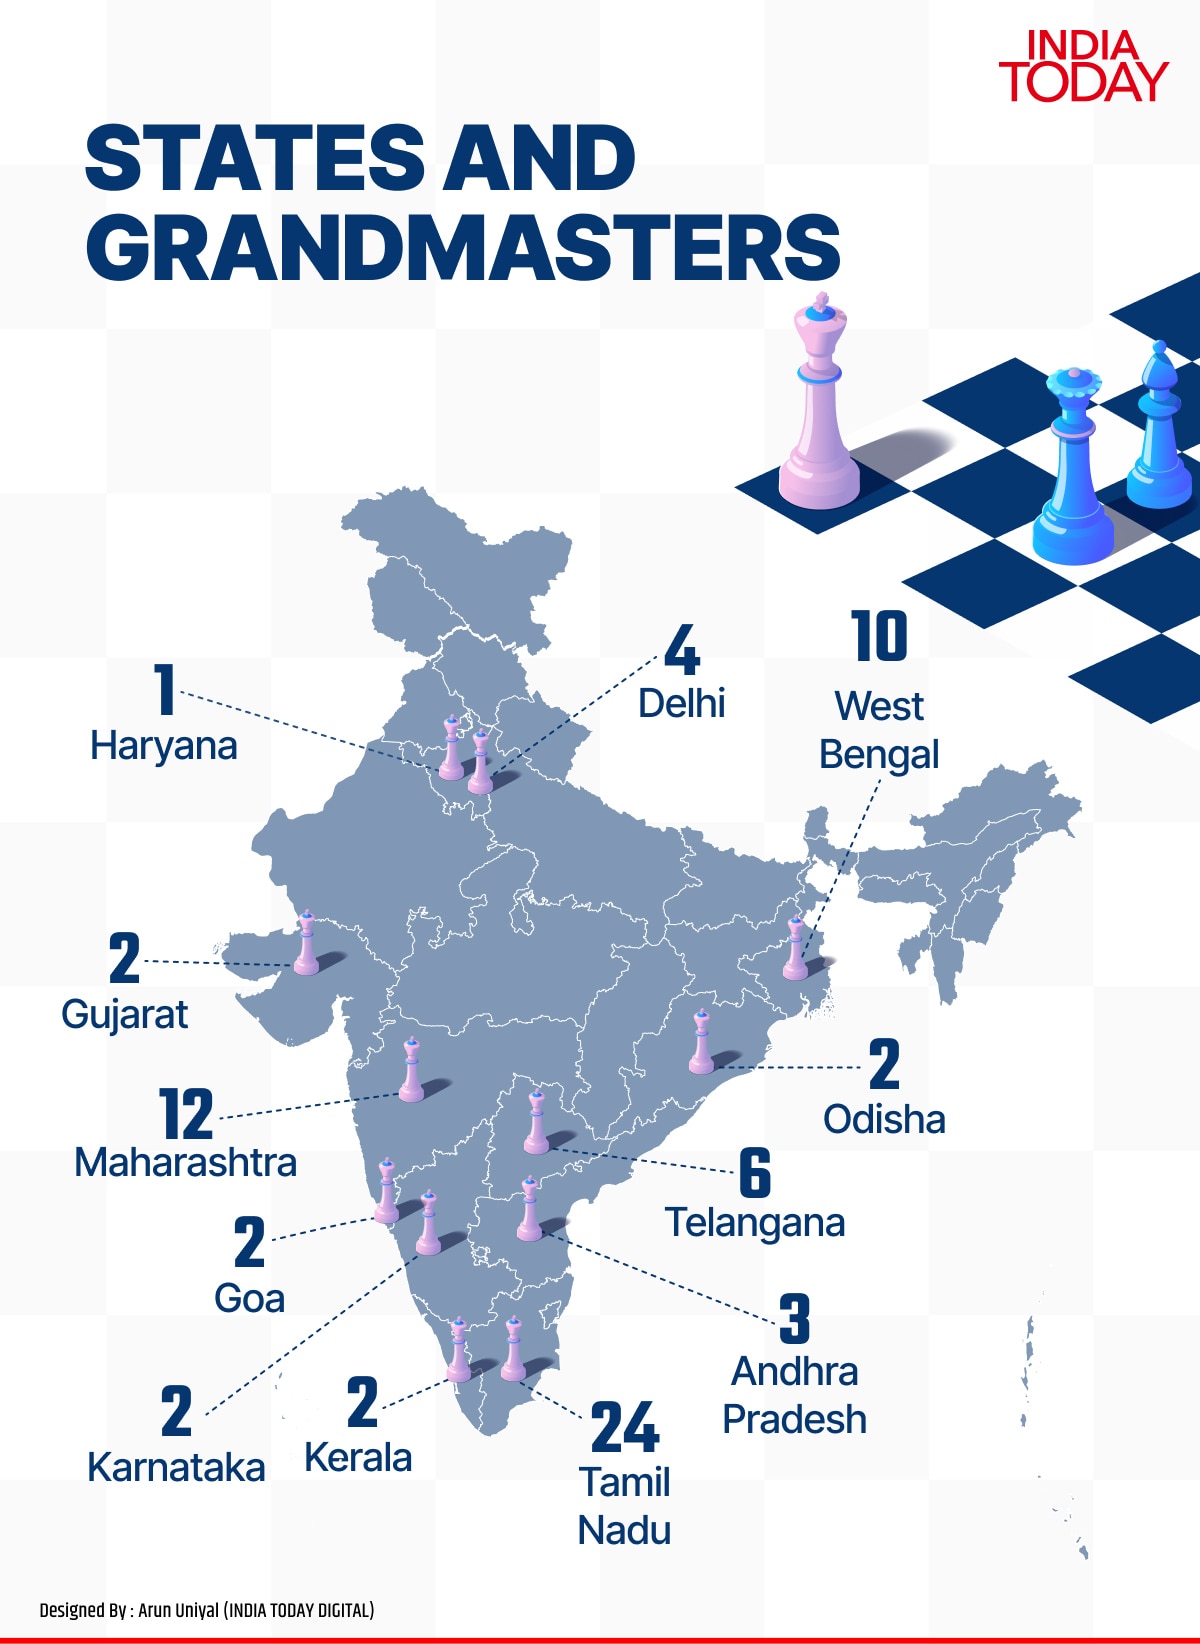 indians storming global chess stage. can your kid be a grandmaster too?